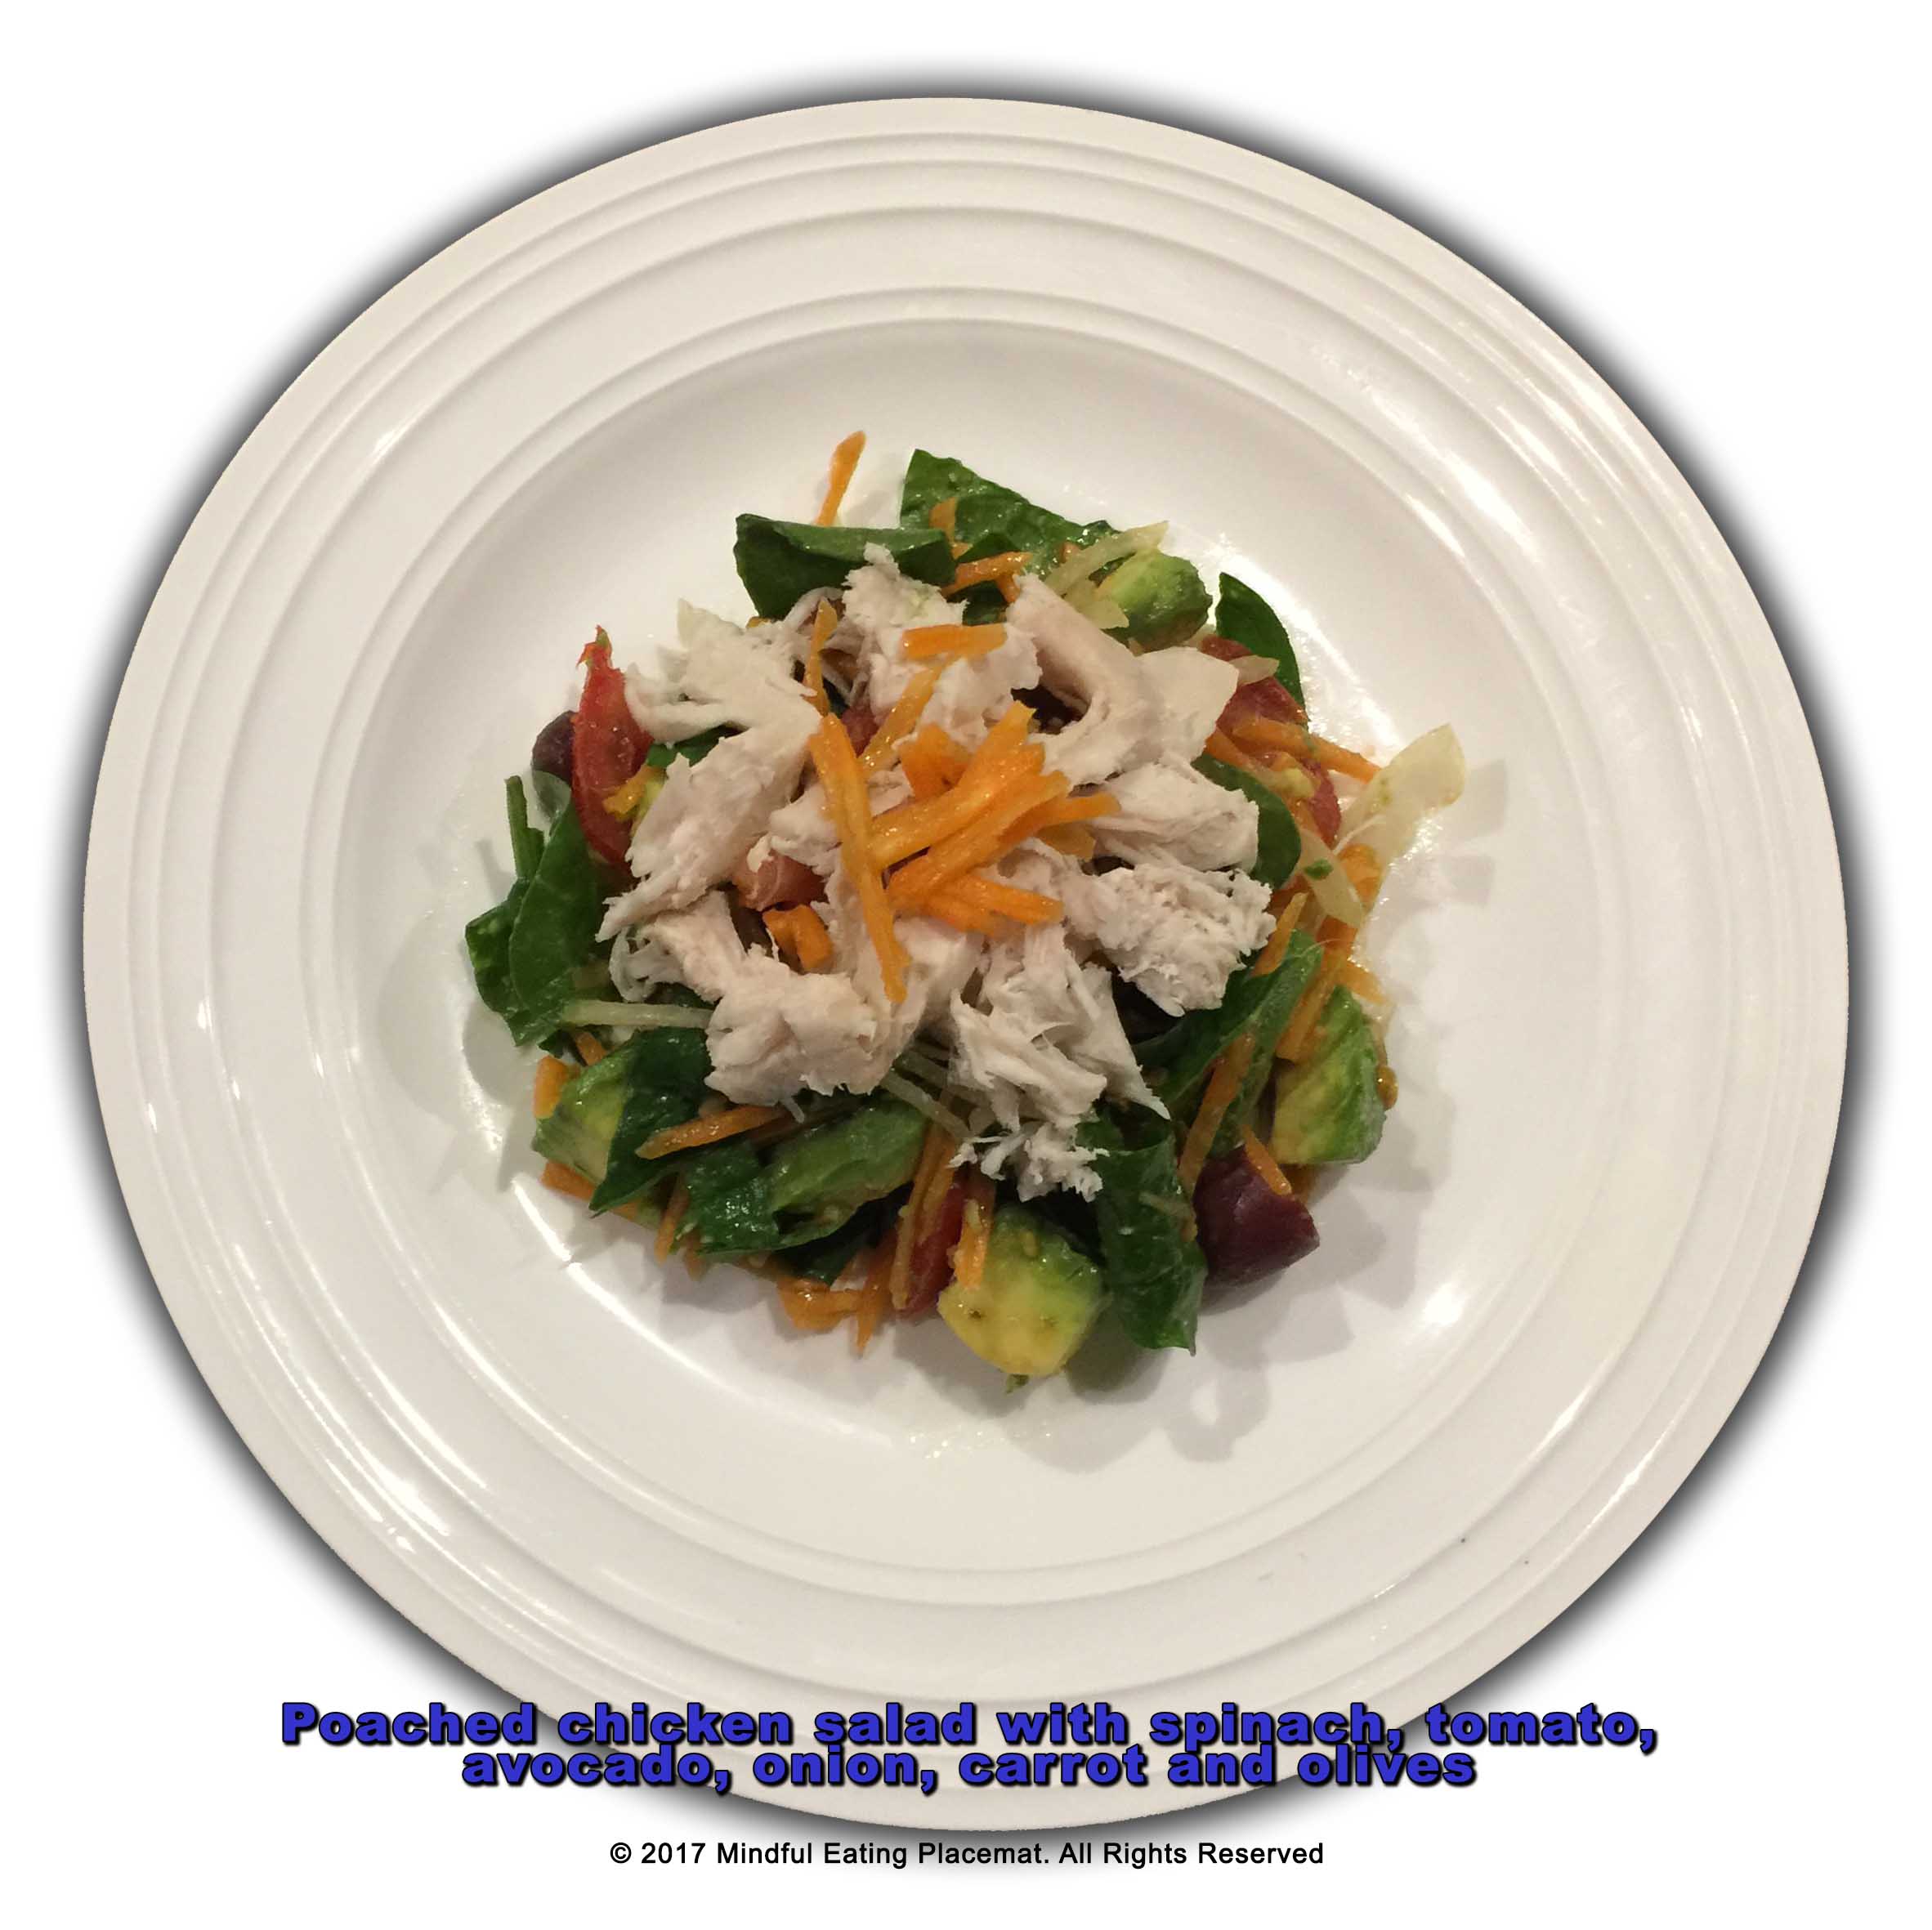 Poached chicken salad with spinach, tomato, avocado, onion, carrots and olives